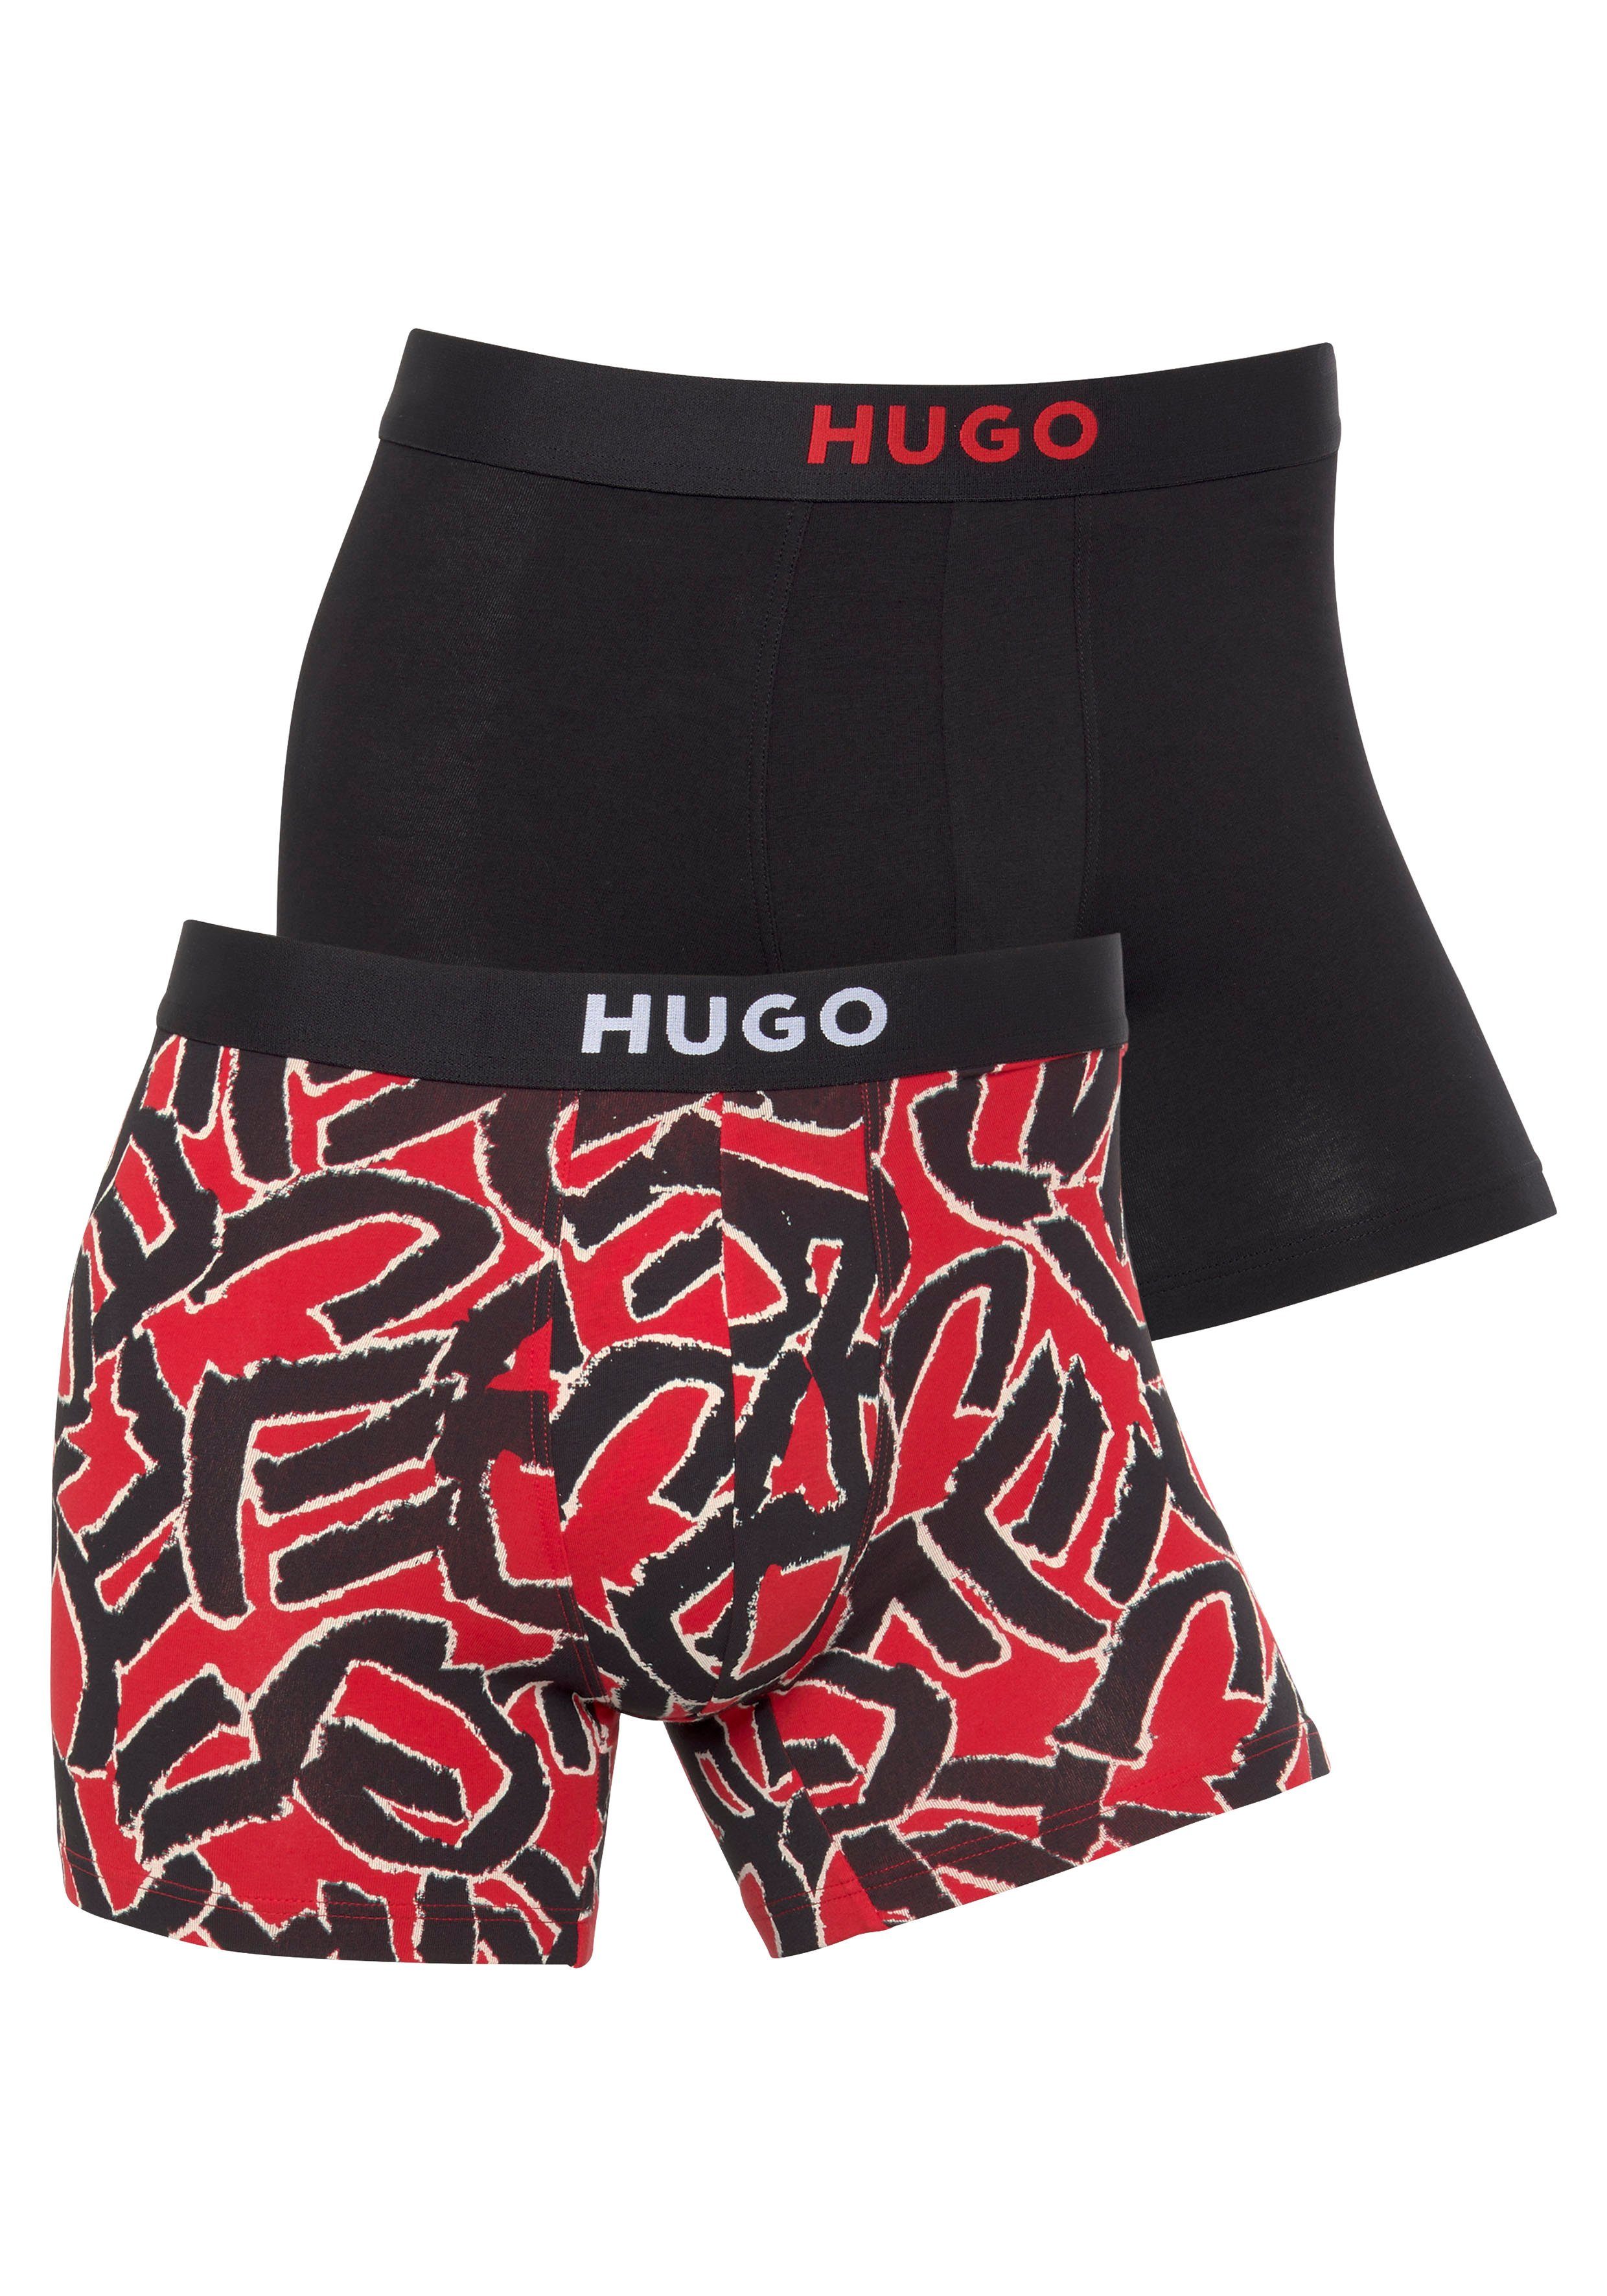 BOXERBR BROTHER HUGO Boxer PACK